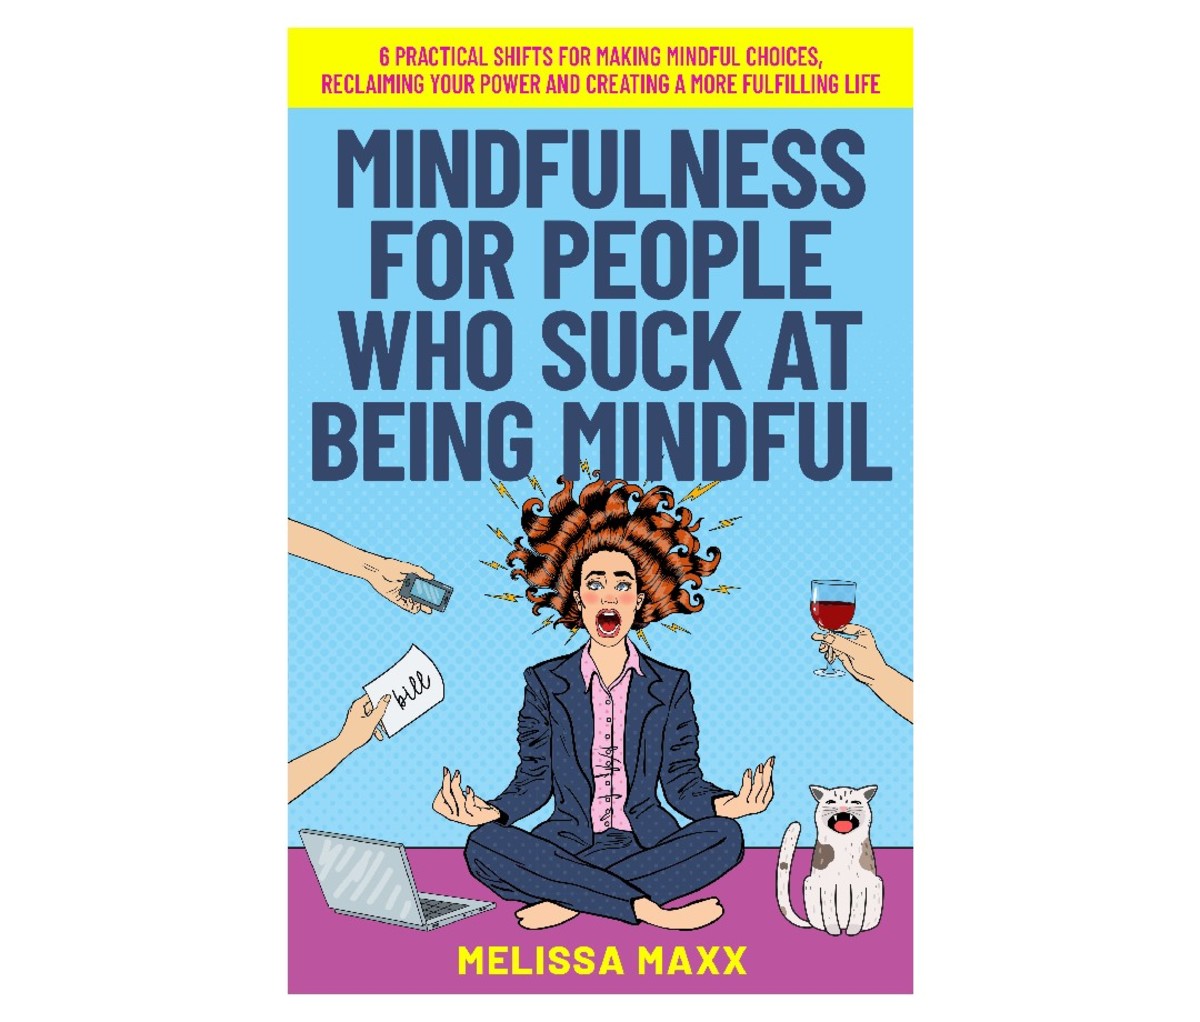 Mindfulness For People Who Suck At Being Mindful: 6 Practical Shifts For Making Mindful Choices, Reclaiming Your Power and Creating A More Fulfilling Life by Melissa Maxx